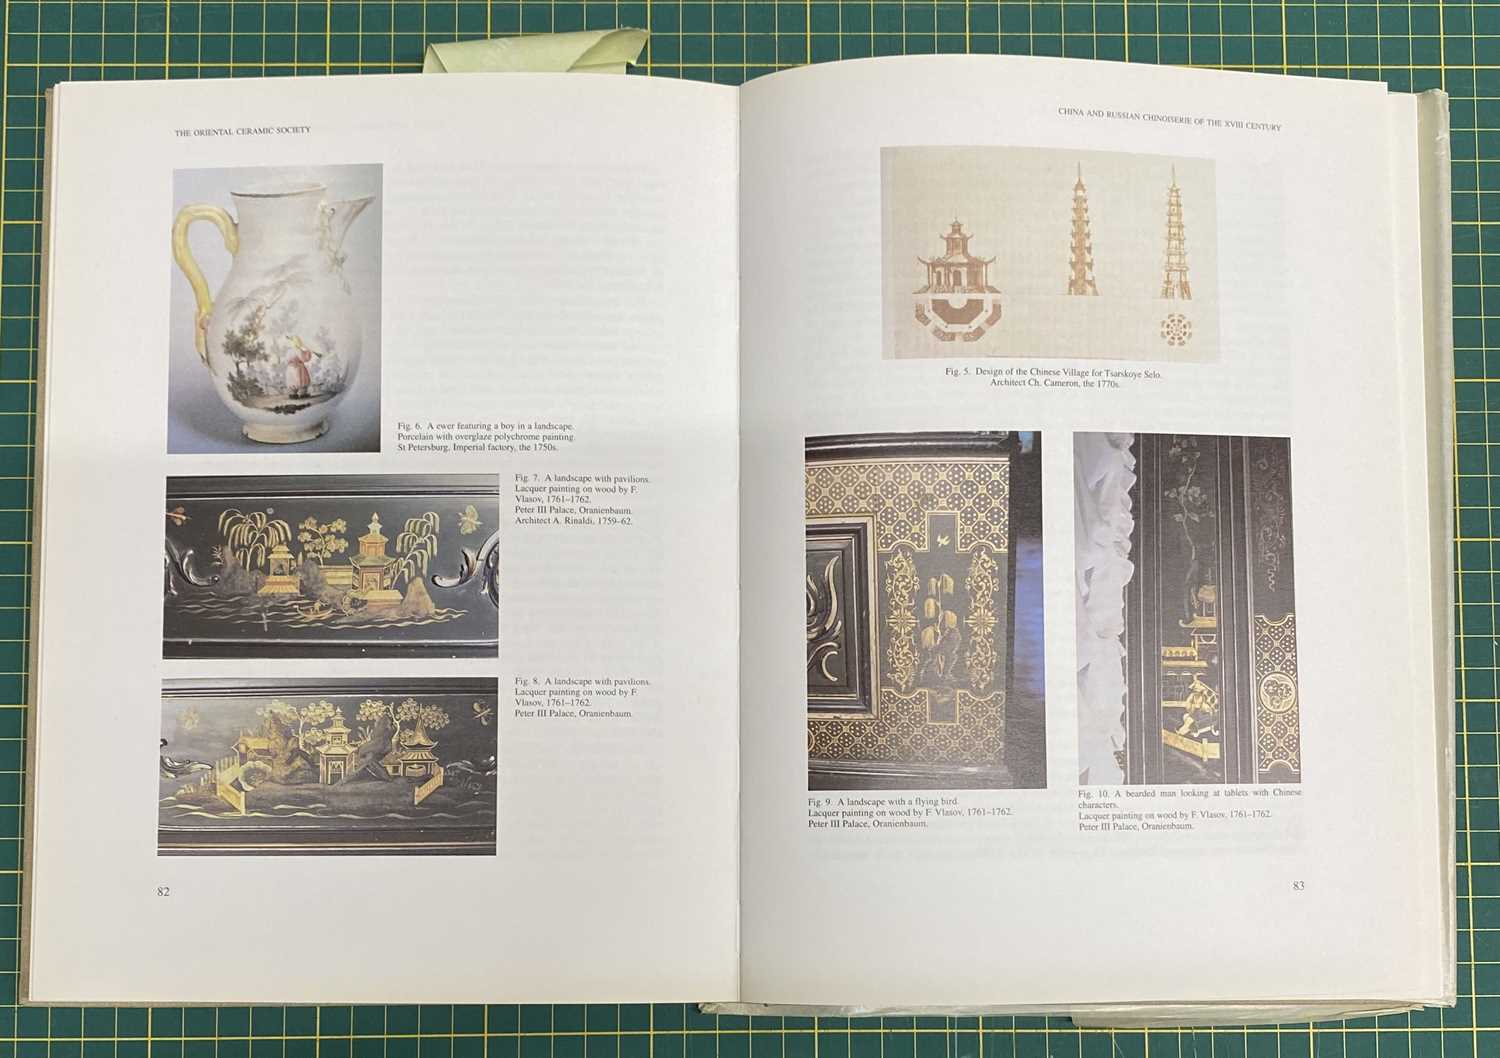 TRANSACTIONS OF THE ORIENTAL CERAMIC SOCIETY. VOLUME 61 1996 - 1997 - Image 3 of 3